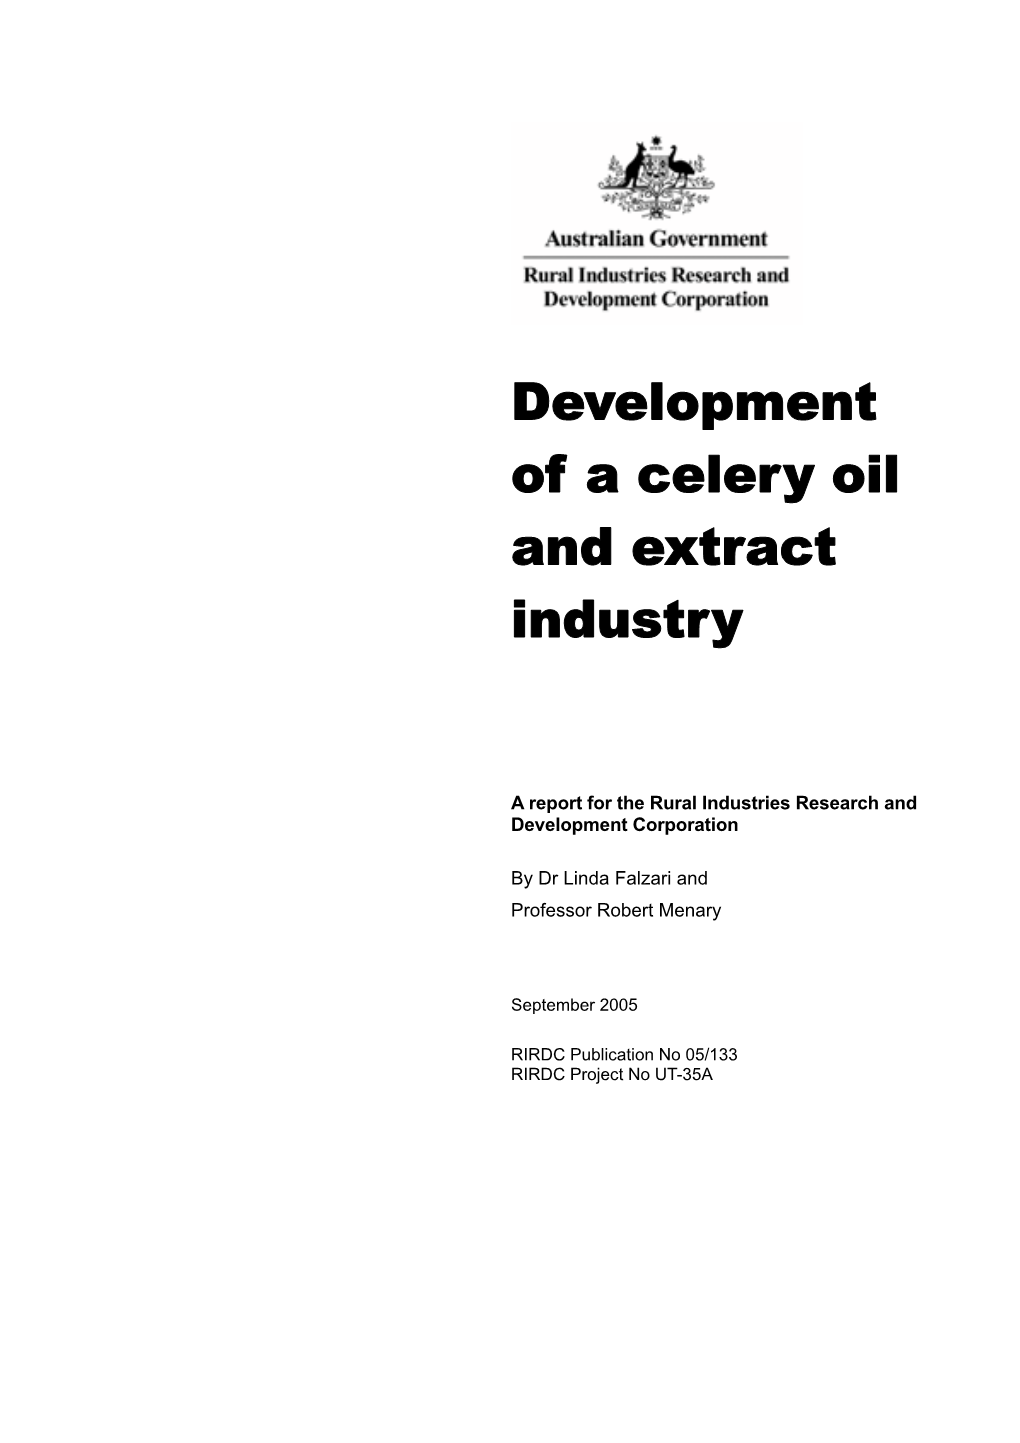 Development of a Celery Oil and Extract Industry